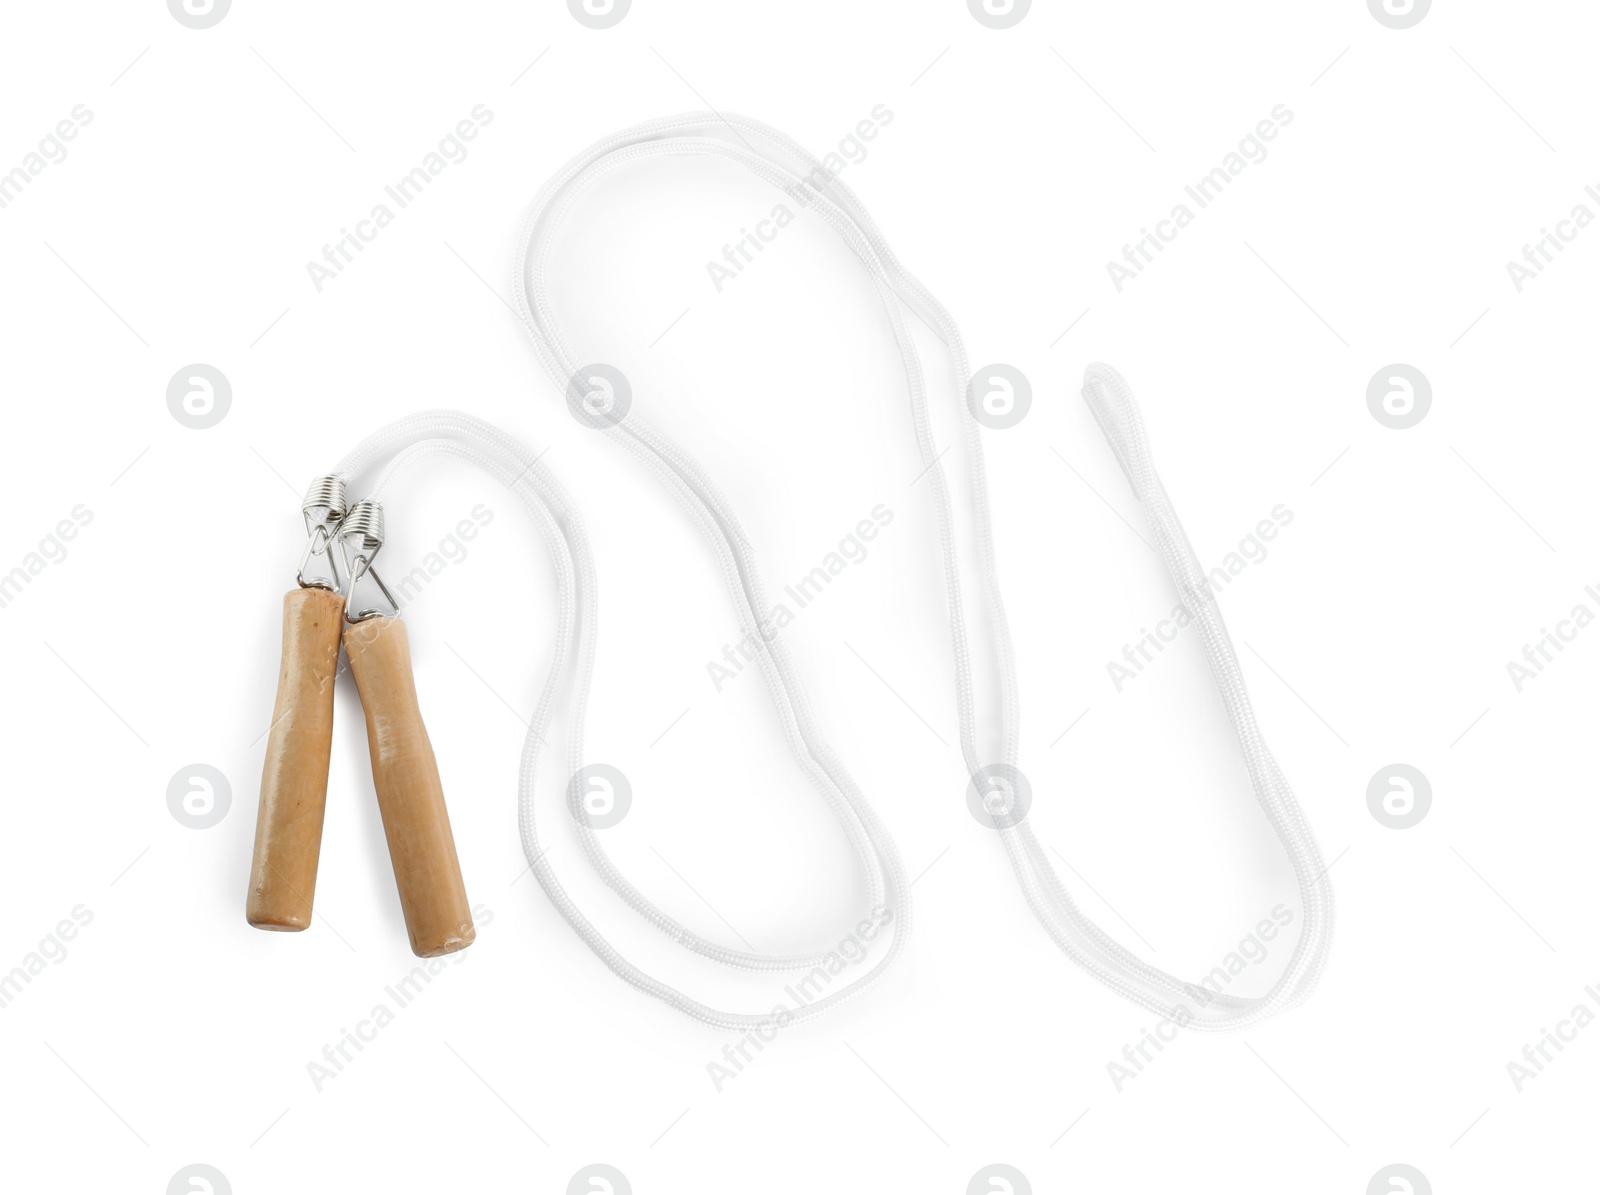 Photo of Skipping rope on white background, top view. Sports equipment